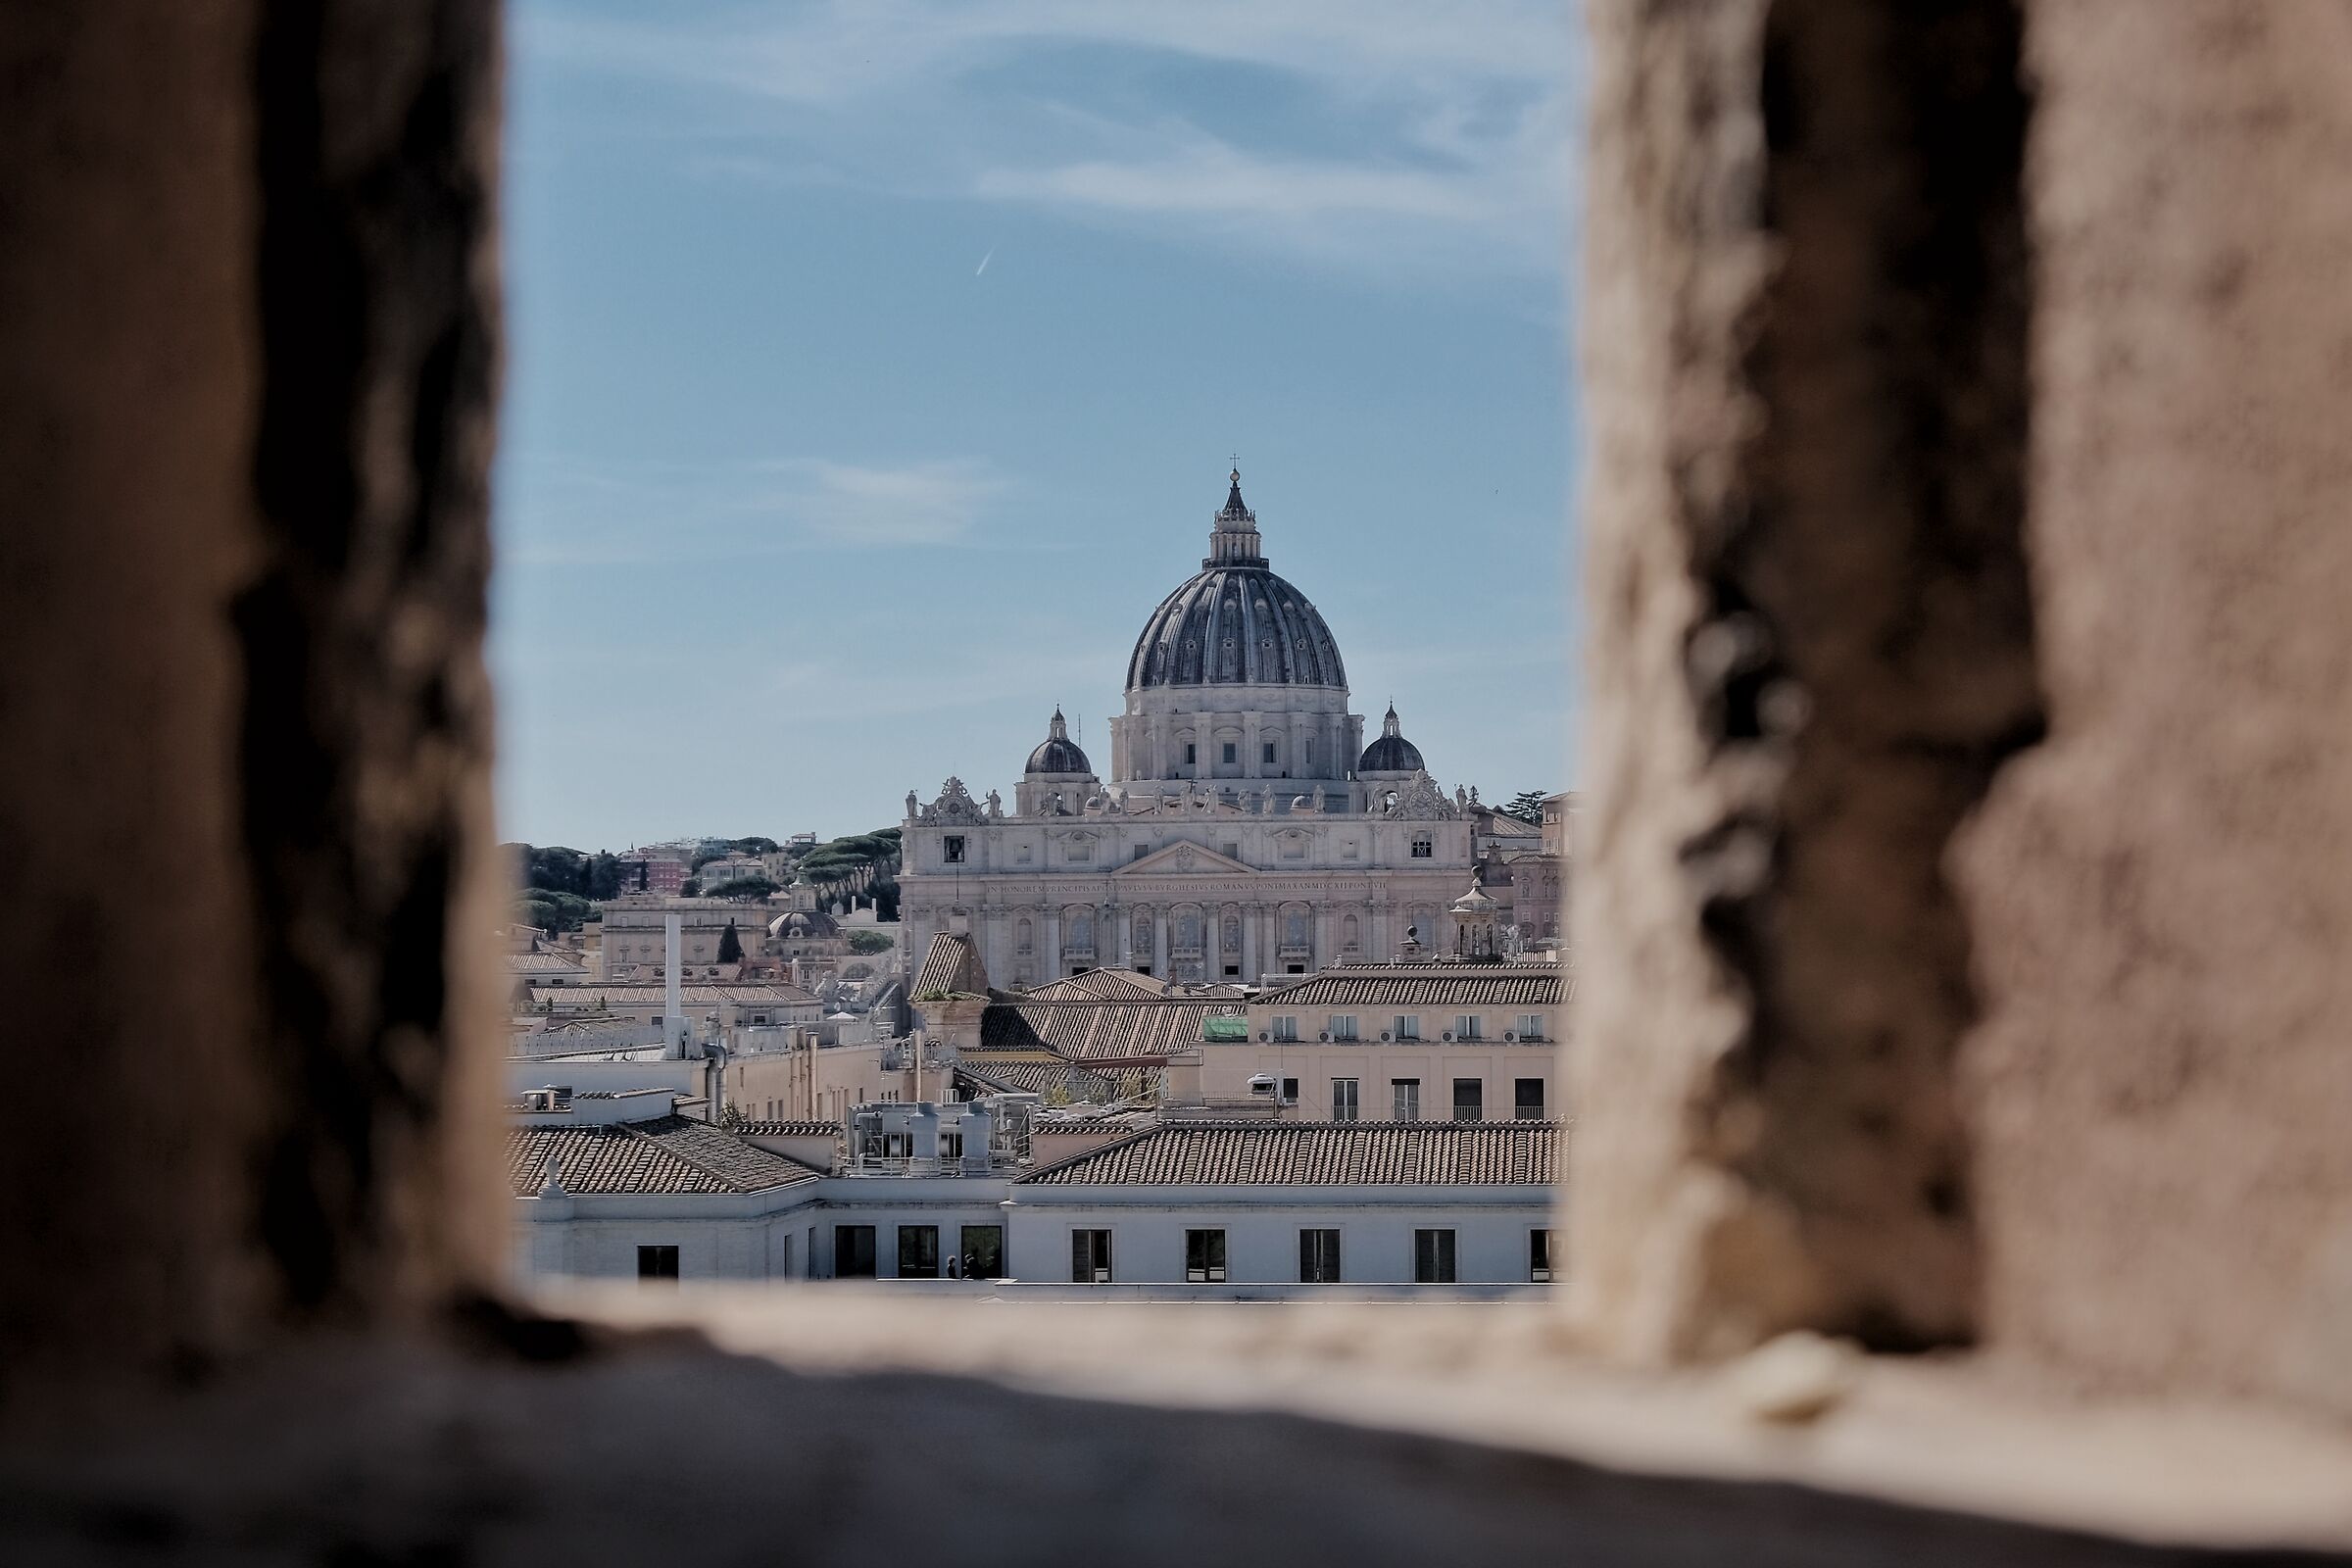 Glimpse of St. Peter's Basilica ...